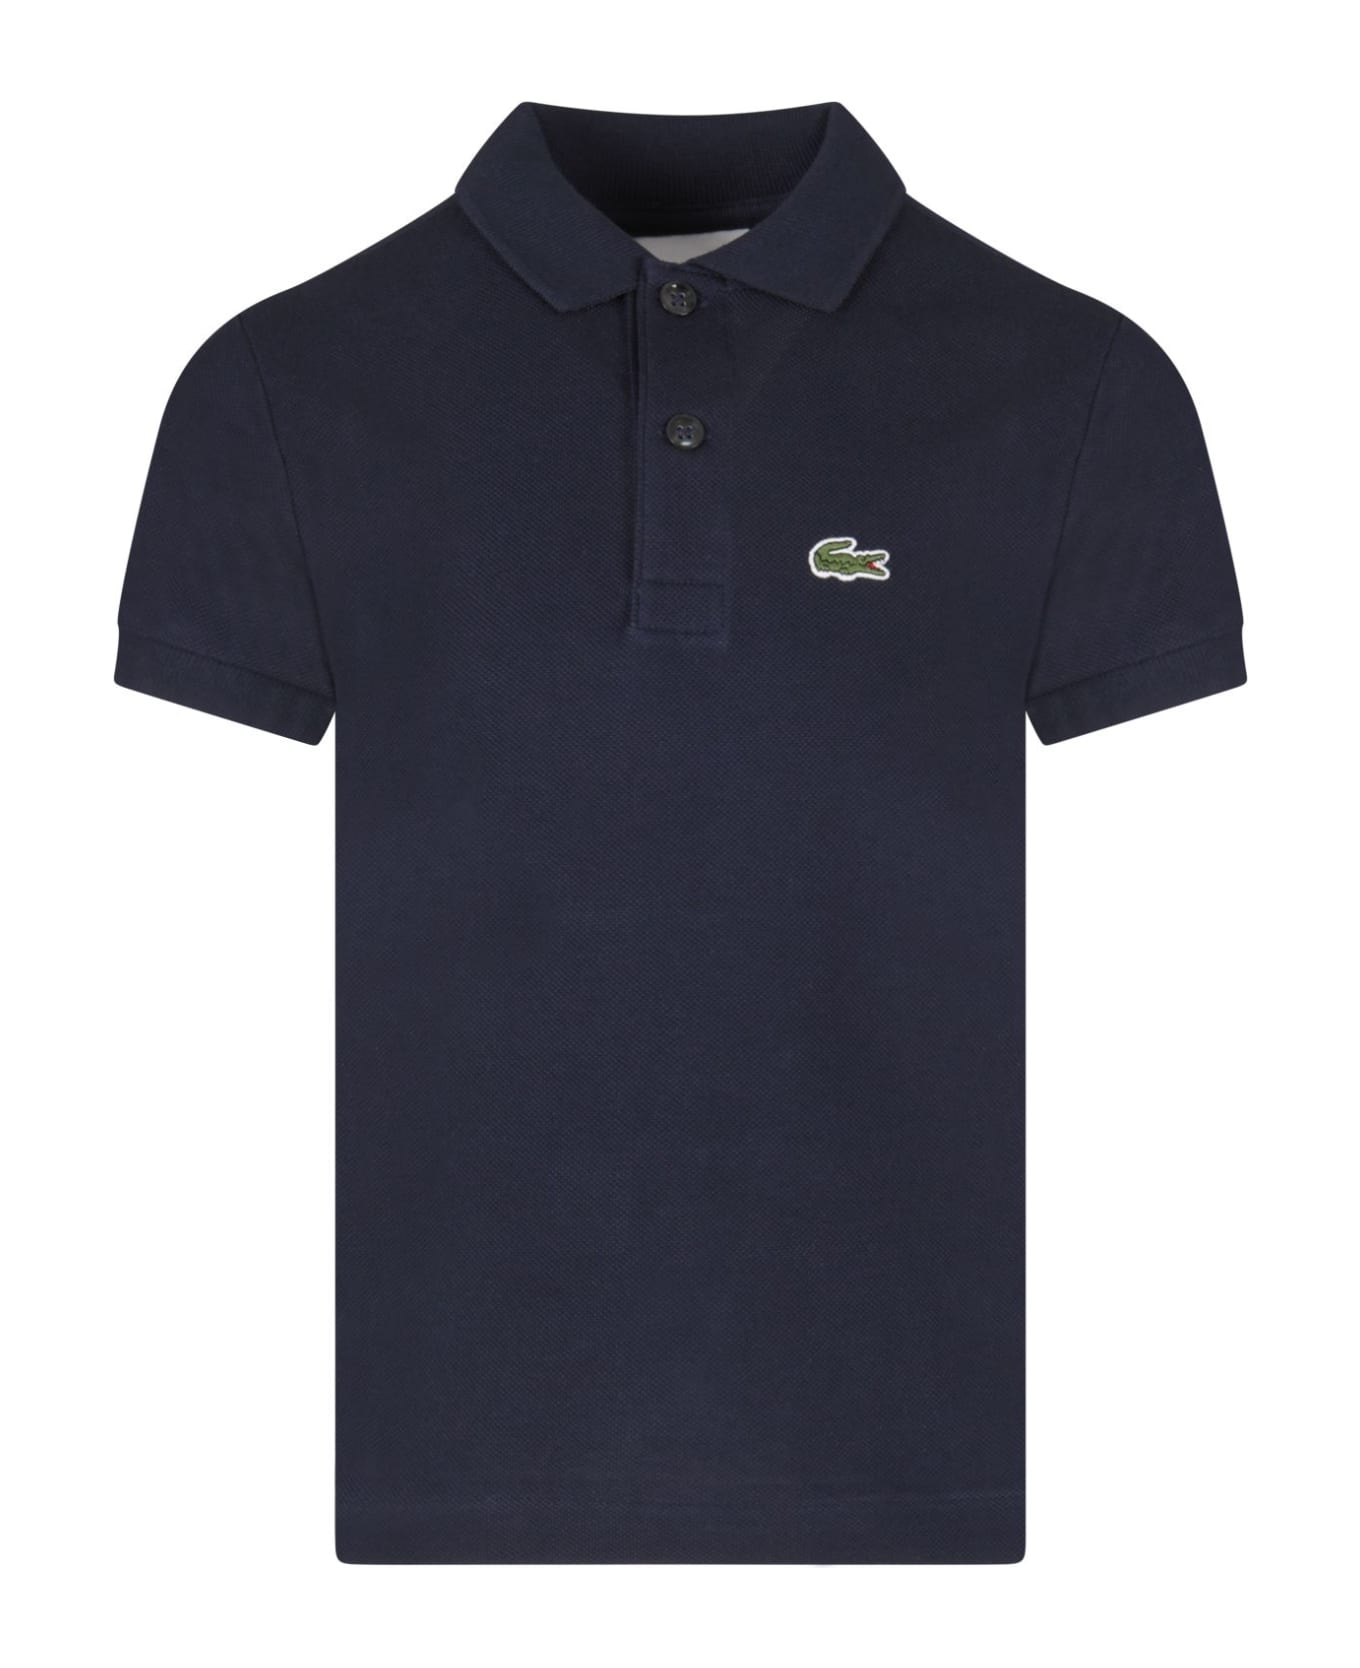 Lacoste Blue Polo For Boy Shirt With Crocodile - Blue